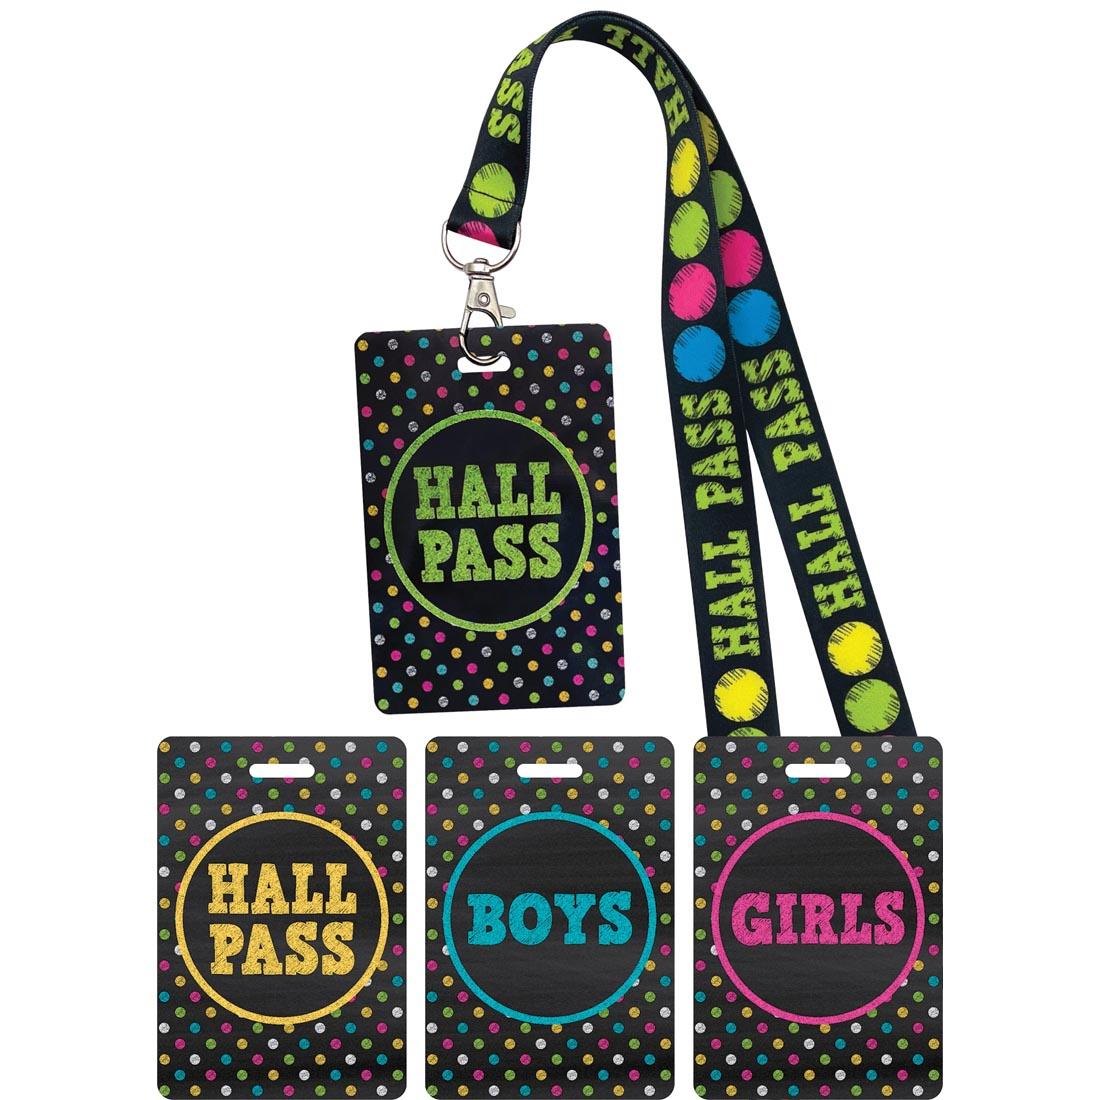 Hall Pass Lanyards from the Chalkboard Brights collection by Teacher Created Resources